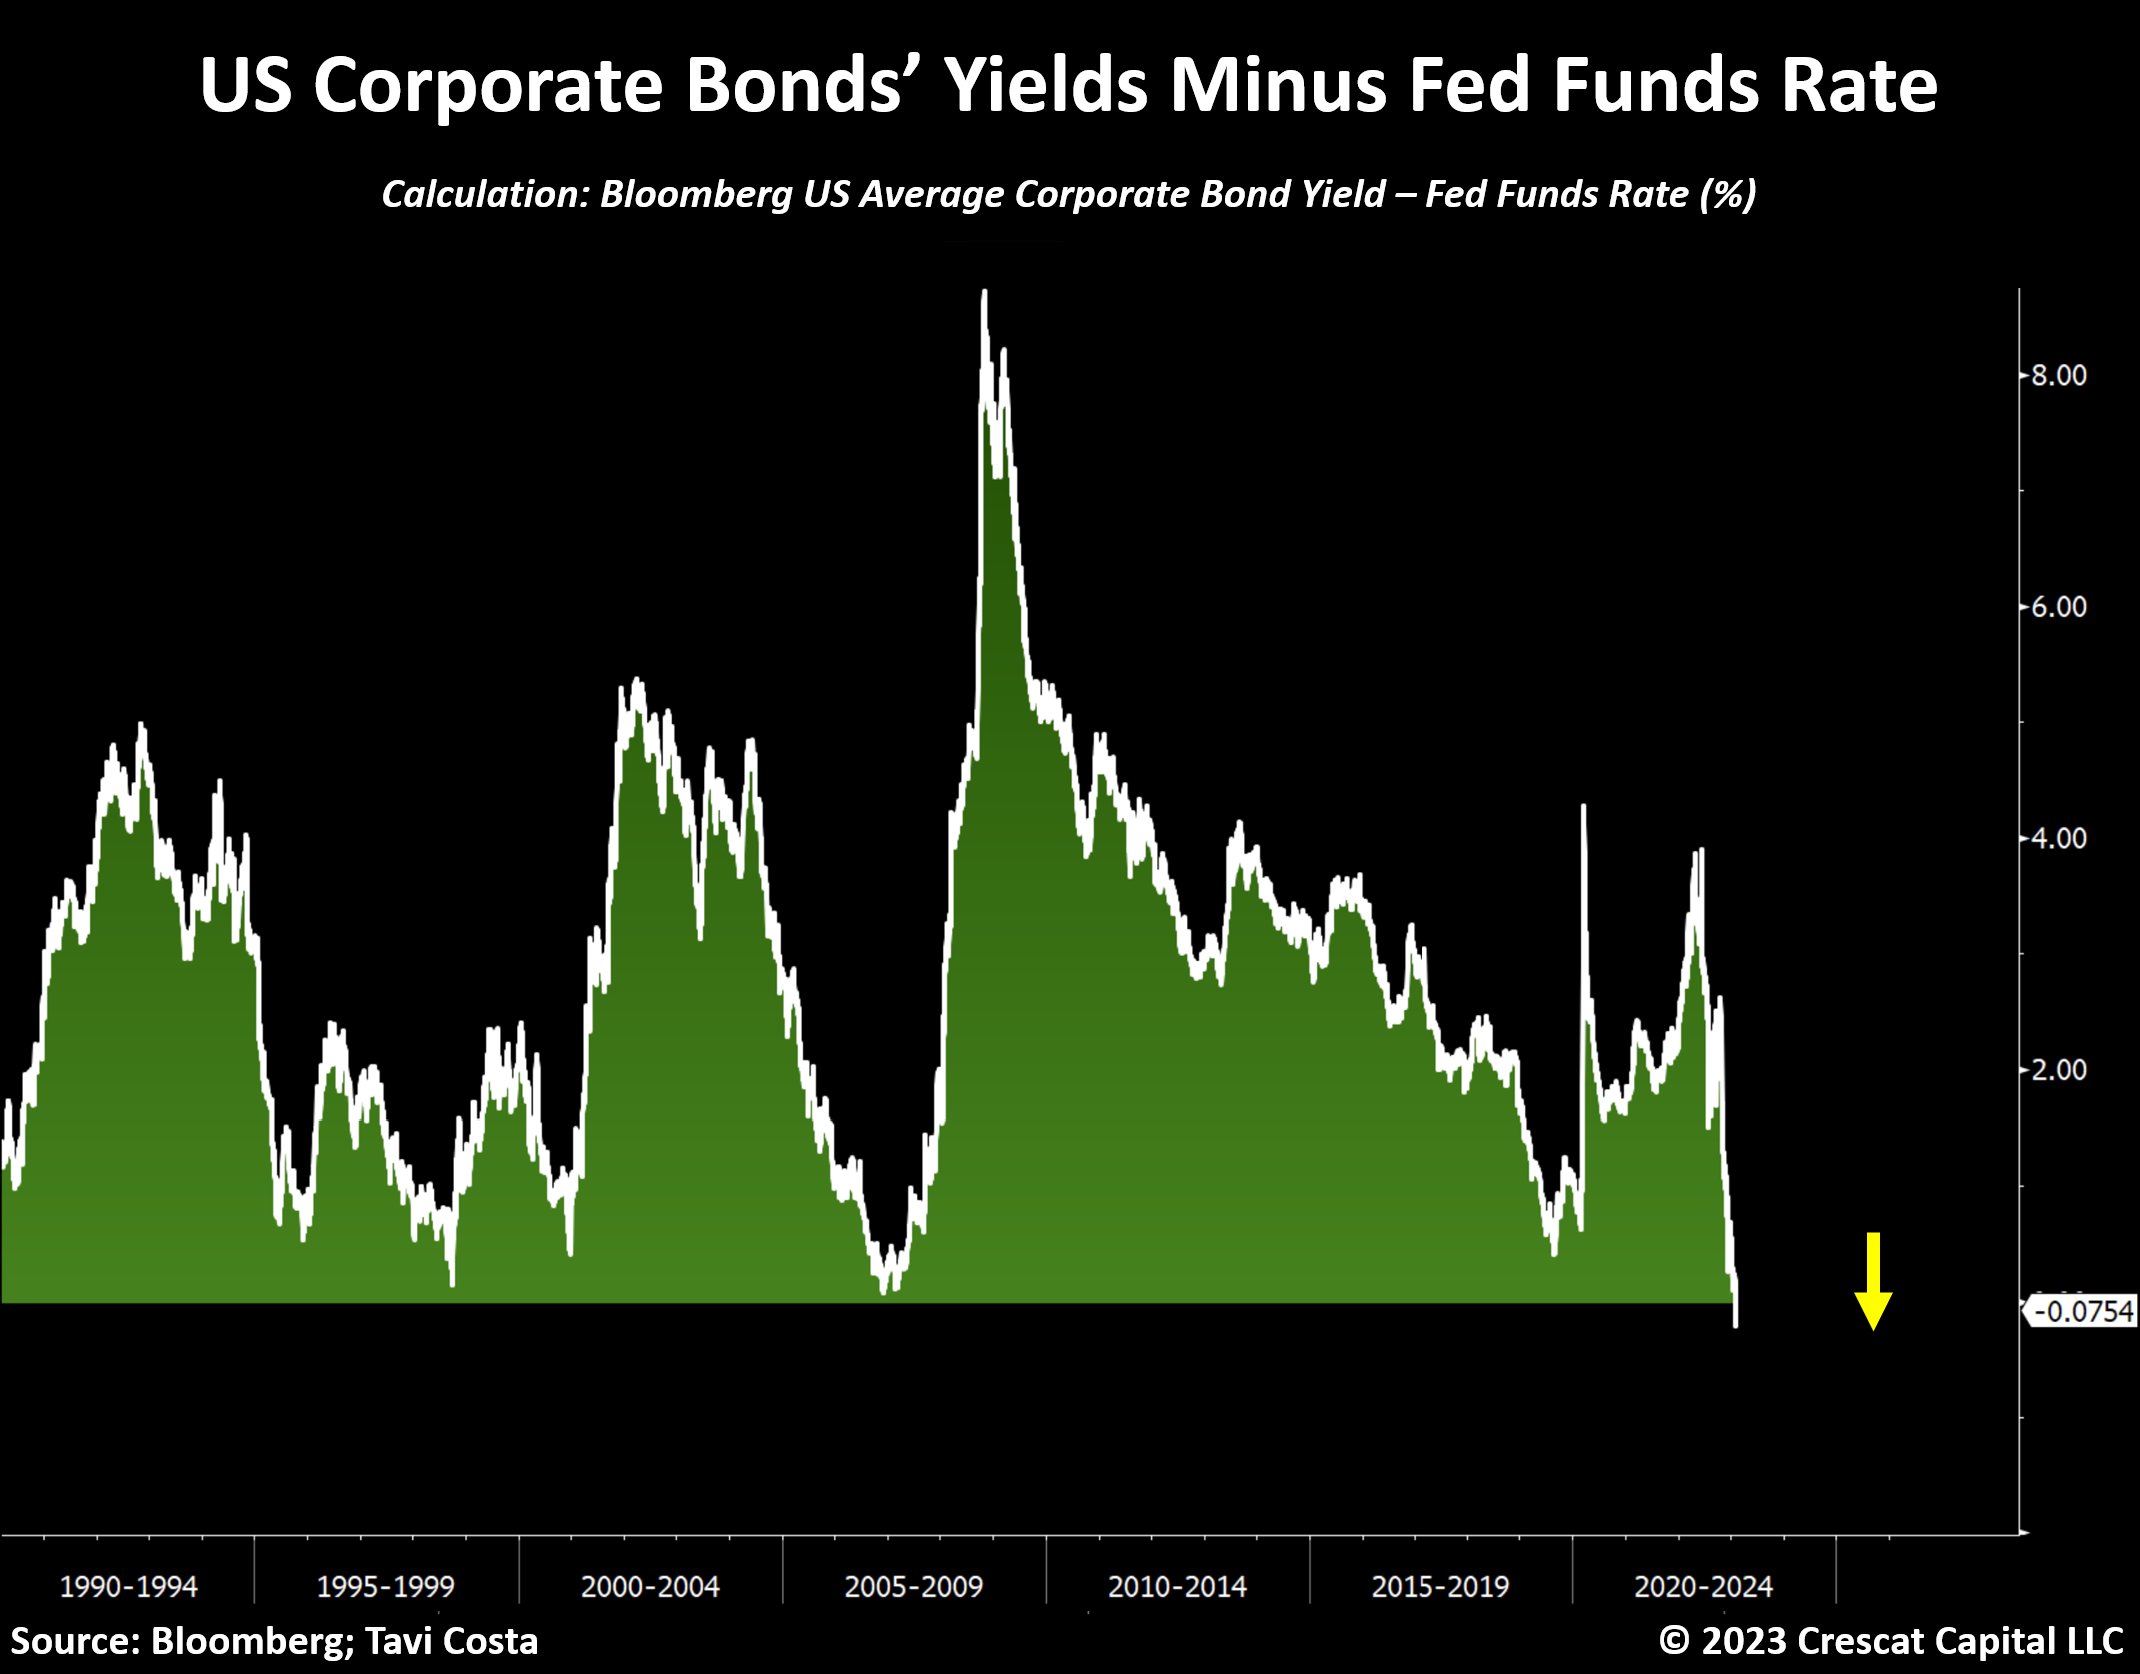 Corporate bonds yield less than the Fed funds rate for the first time in 30 years